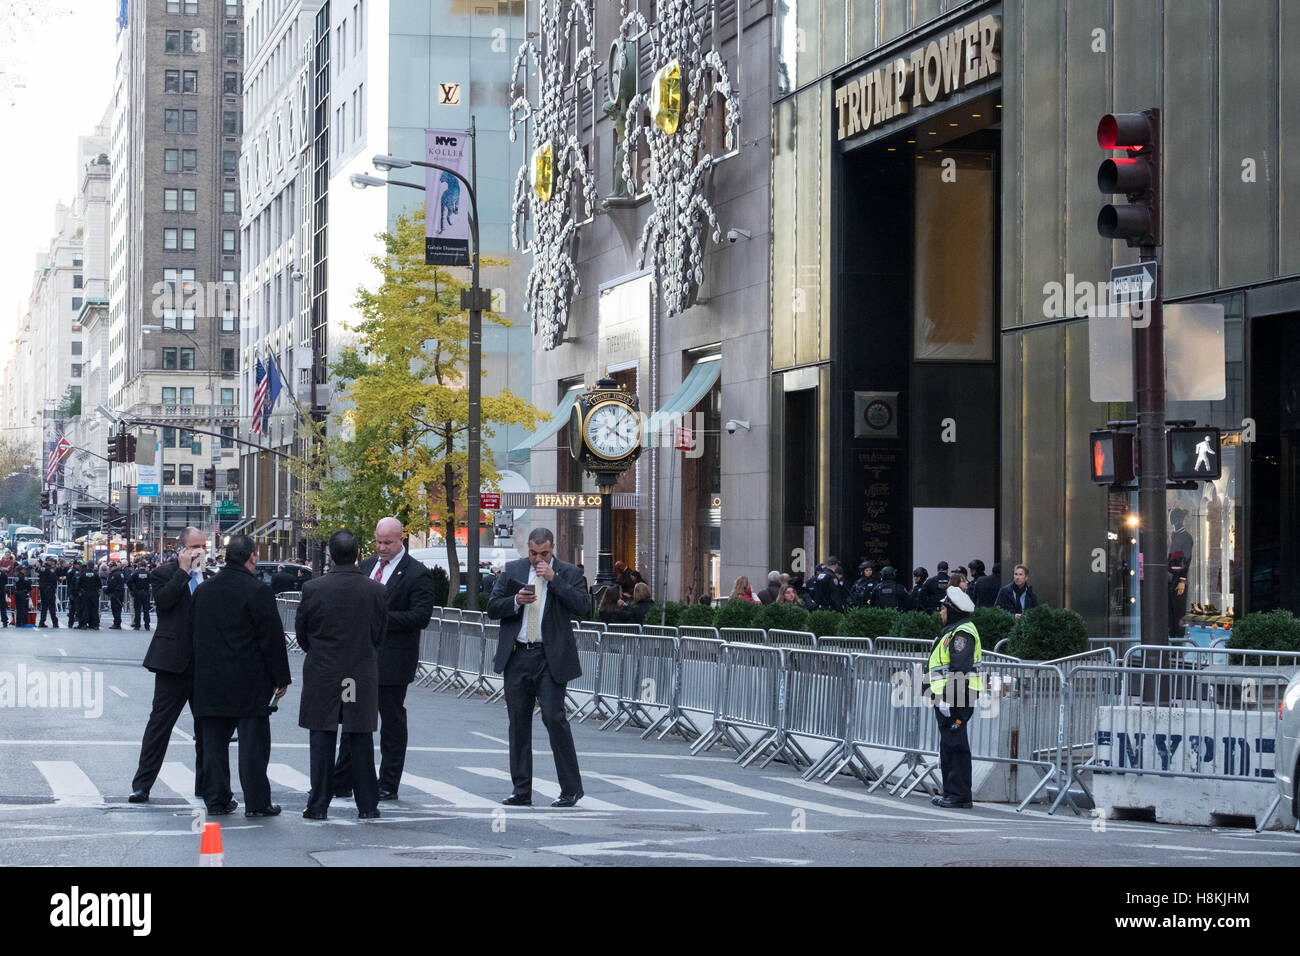 New York, USA. 13th November, 2016. NYC Police Commissioner New York, USA. 13th November, 2016. James P. O'Neill and other high-ranking NYPD officials convene a meeting on 5th Avenue, New York City, in front of the barricaded Trump Tower, as protestors march in the background. Credit:  barbara cameron pix/Alamy Live News Stock Photo